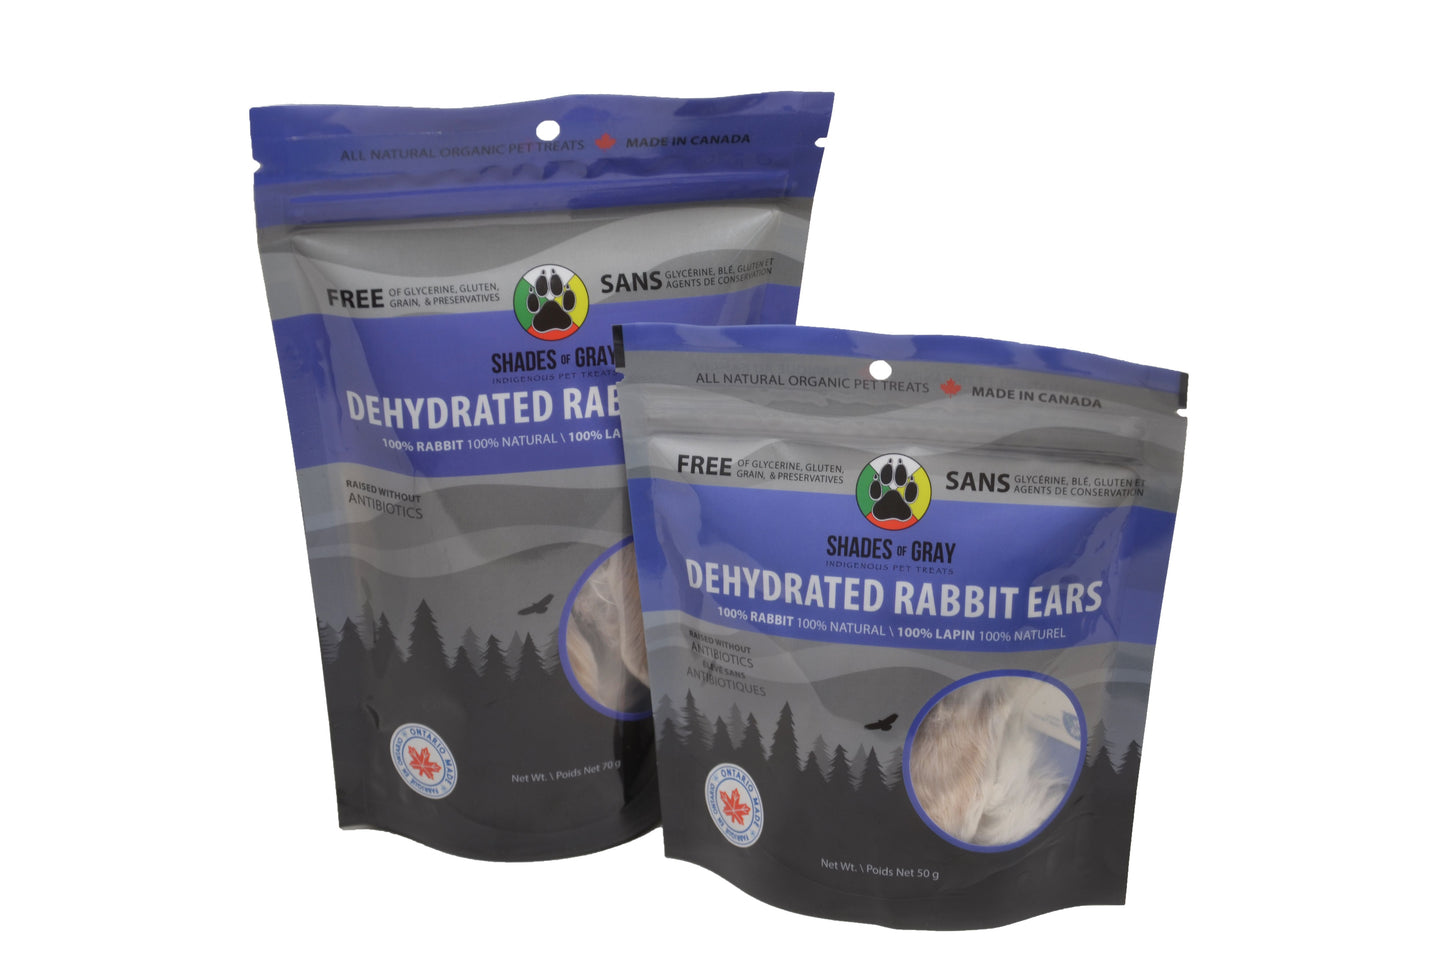 Rabbit Ear Pet Treats made with organic all natural 100% rabbit, for your cats and dogs. Free of Glycerine, Gluten, Grain & Preservatives. Simply Dehydrated.